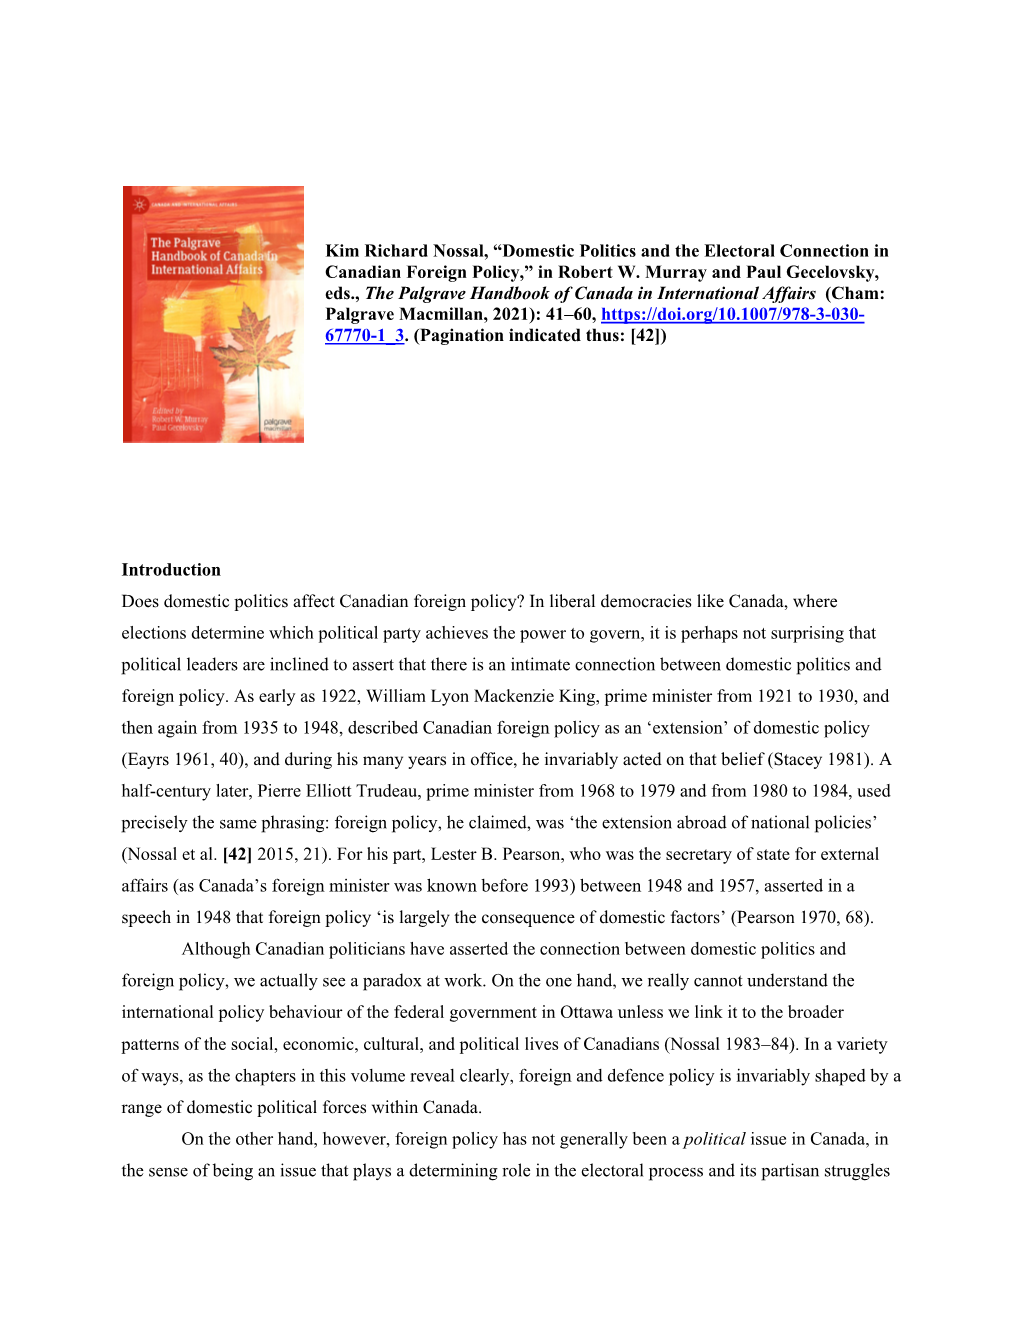 Domestic Politics and the Electoral Connection in Canadian Foreign Policy,” in Robert W